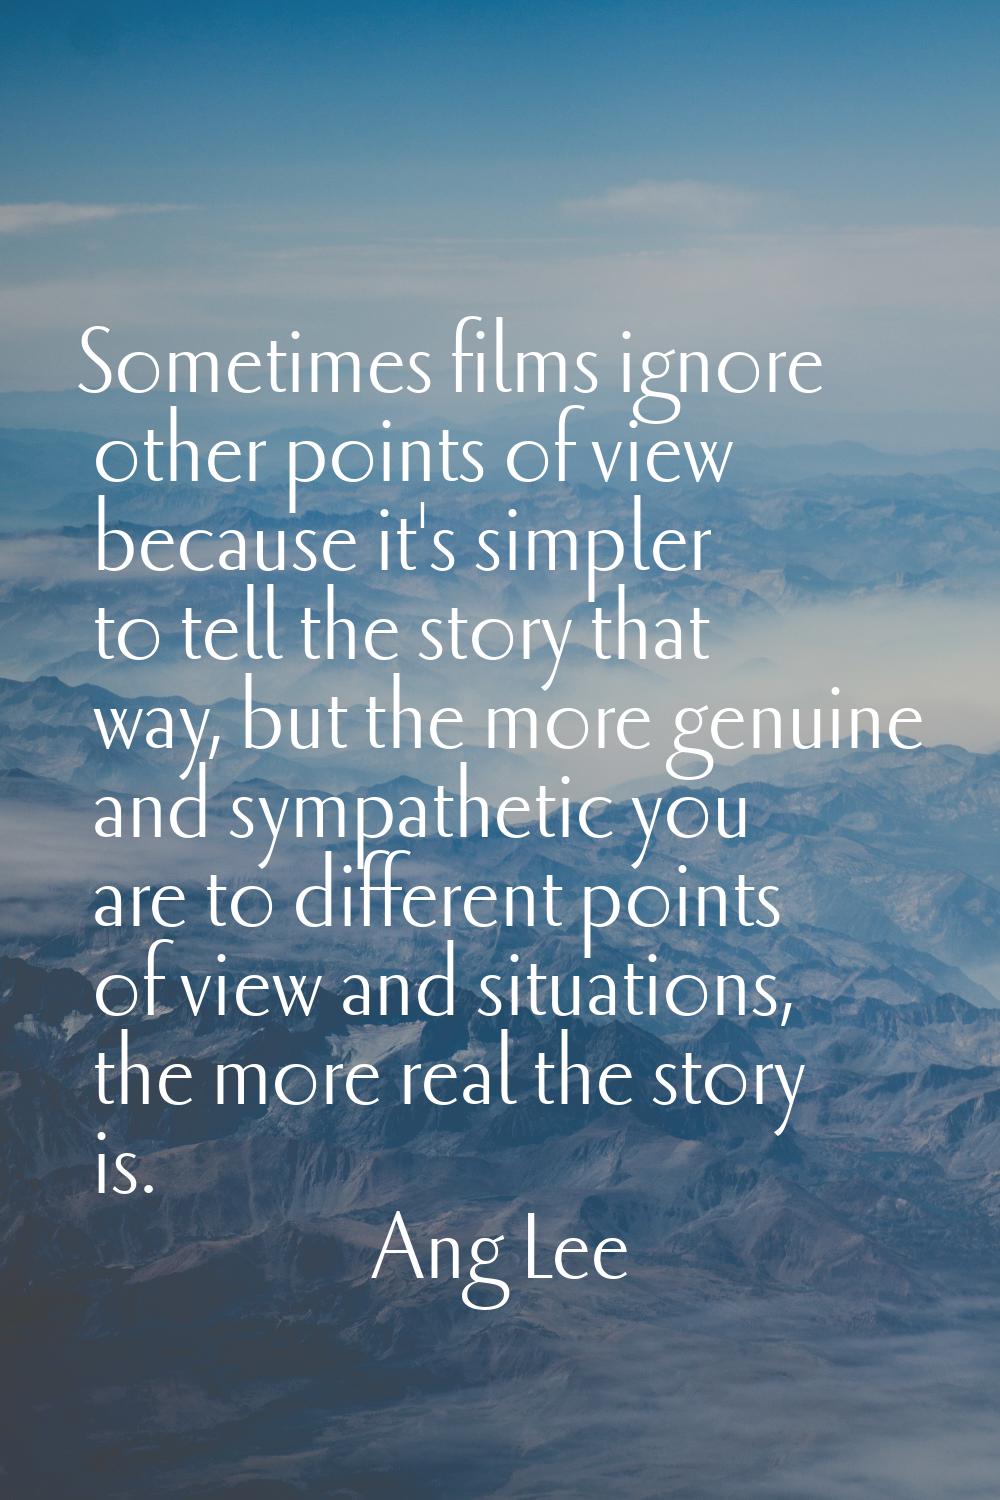 Sometimes films ignore other points of view because it's simpler to tell the story that way, but th